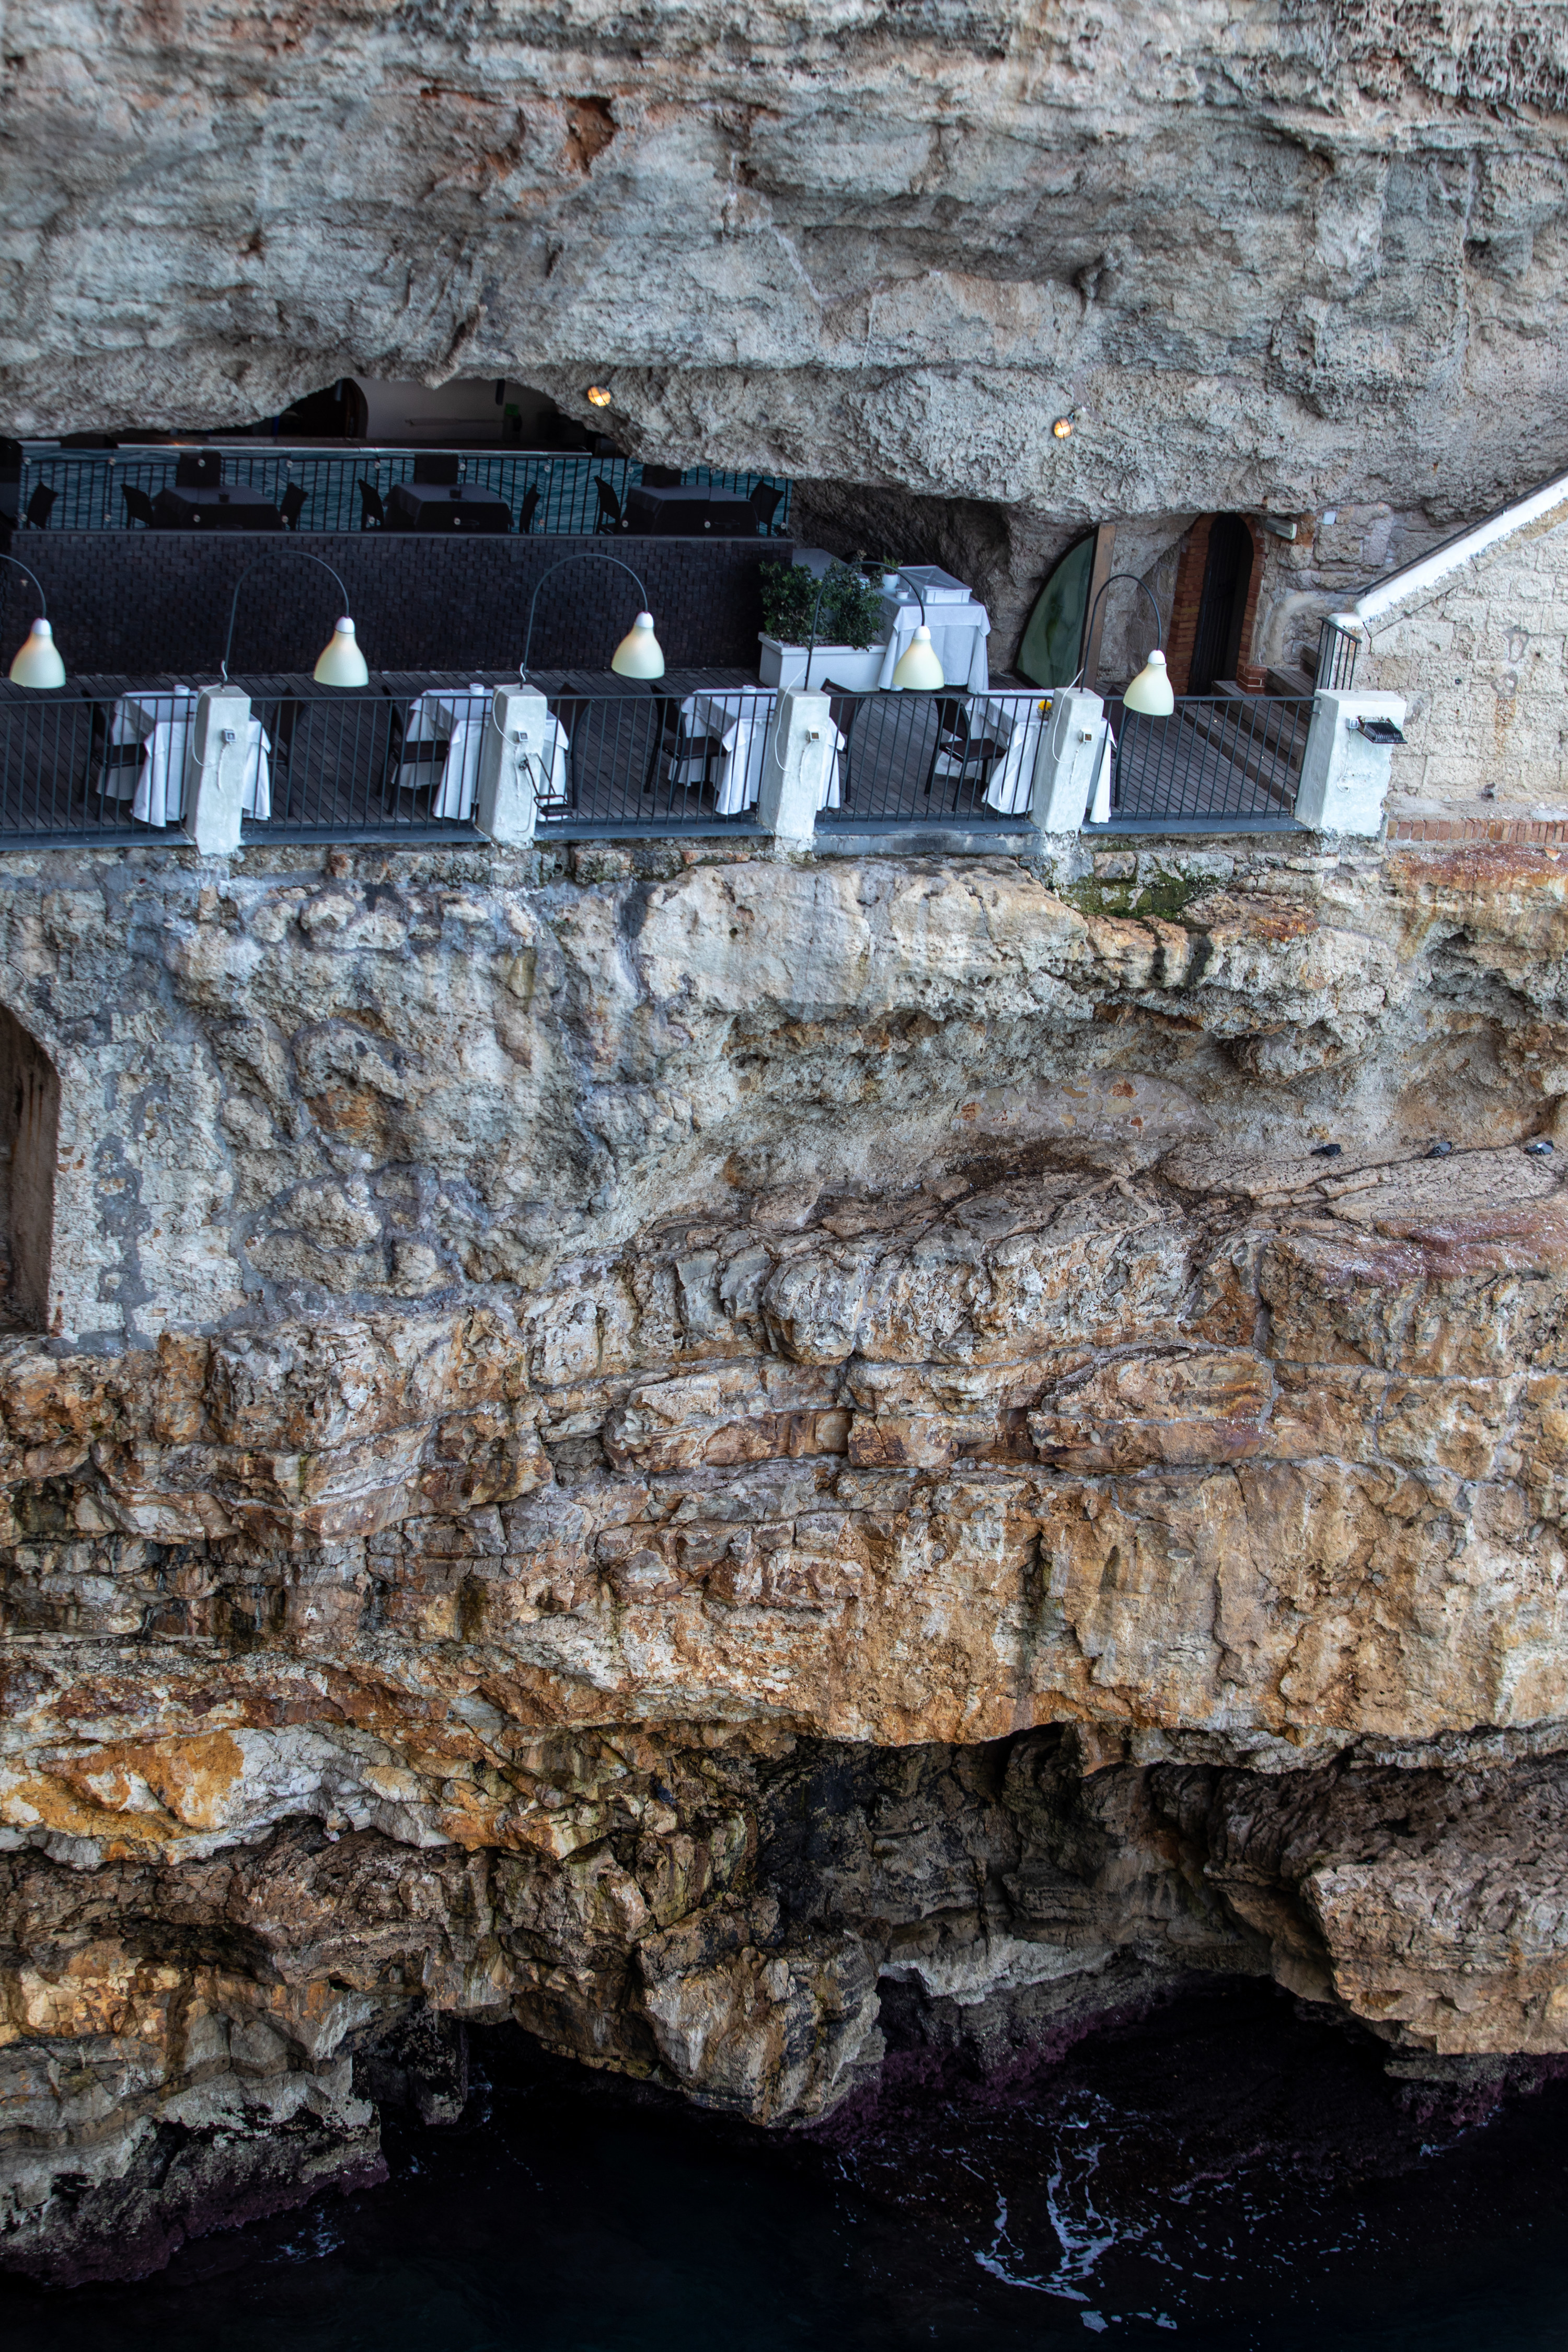 Grotta Palazzese restaurant, set in a cave in the cliffs at Polignano a Mare, Puglia, Italy